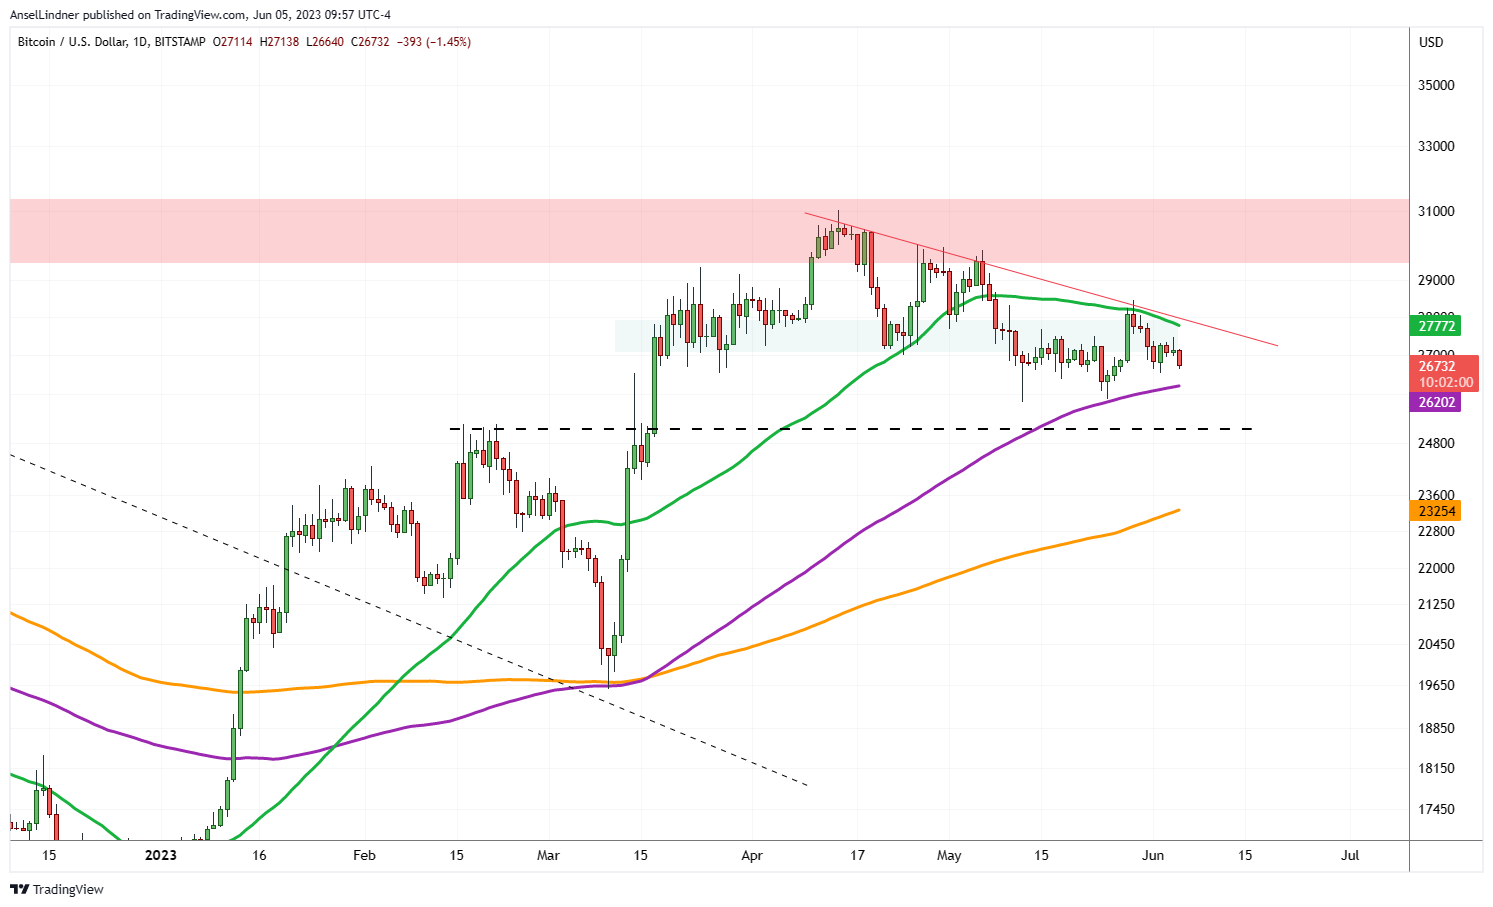 Bitcoin daily chart with select moving averages